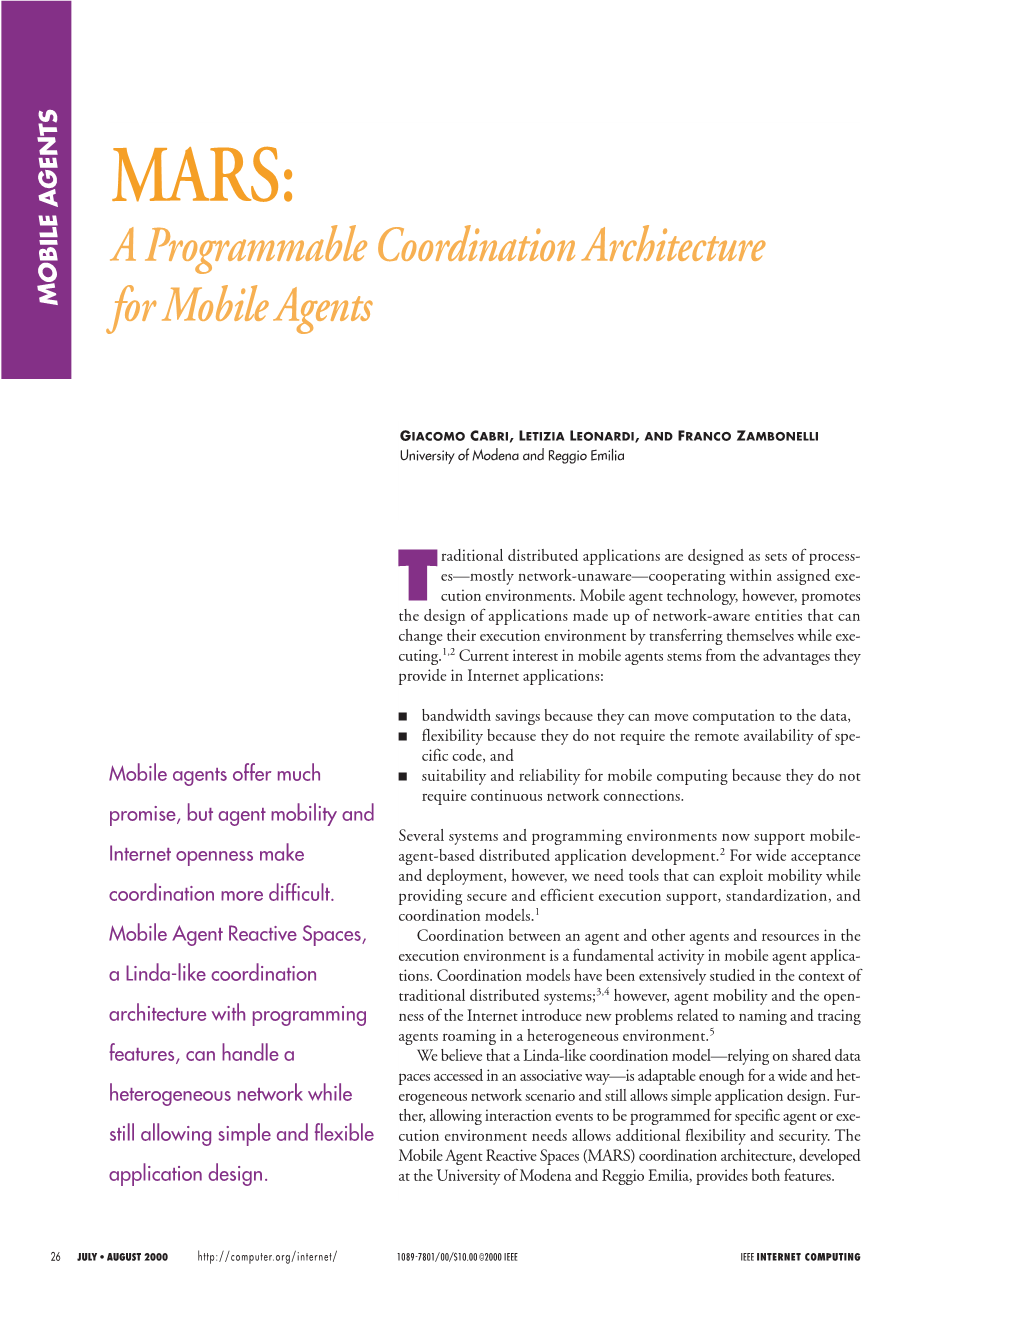 Mars: a Programmable Coordination Architecture for Mobile Agents